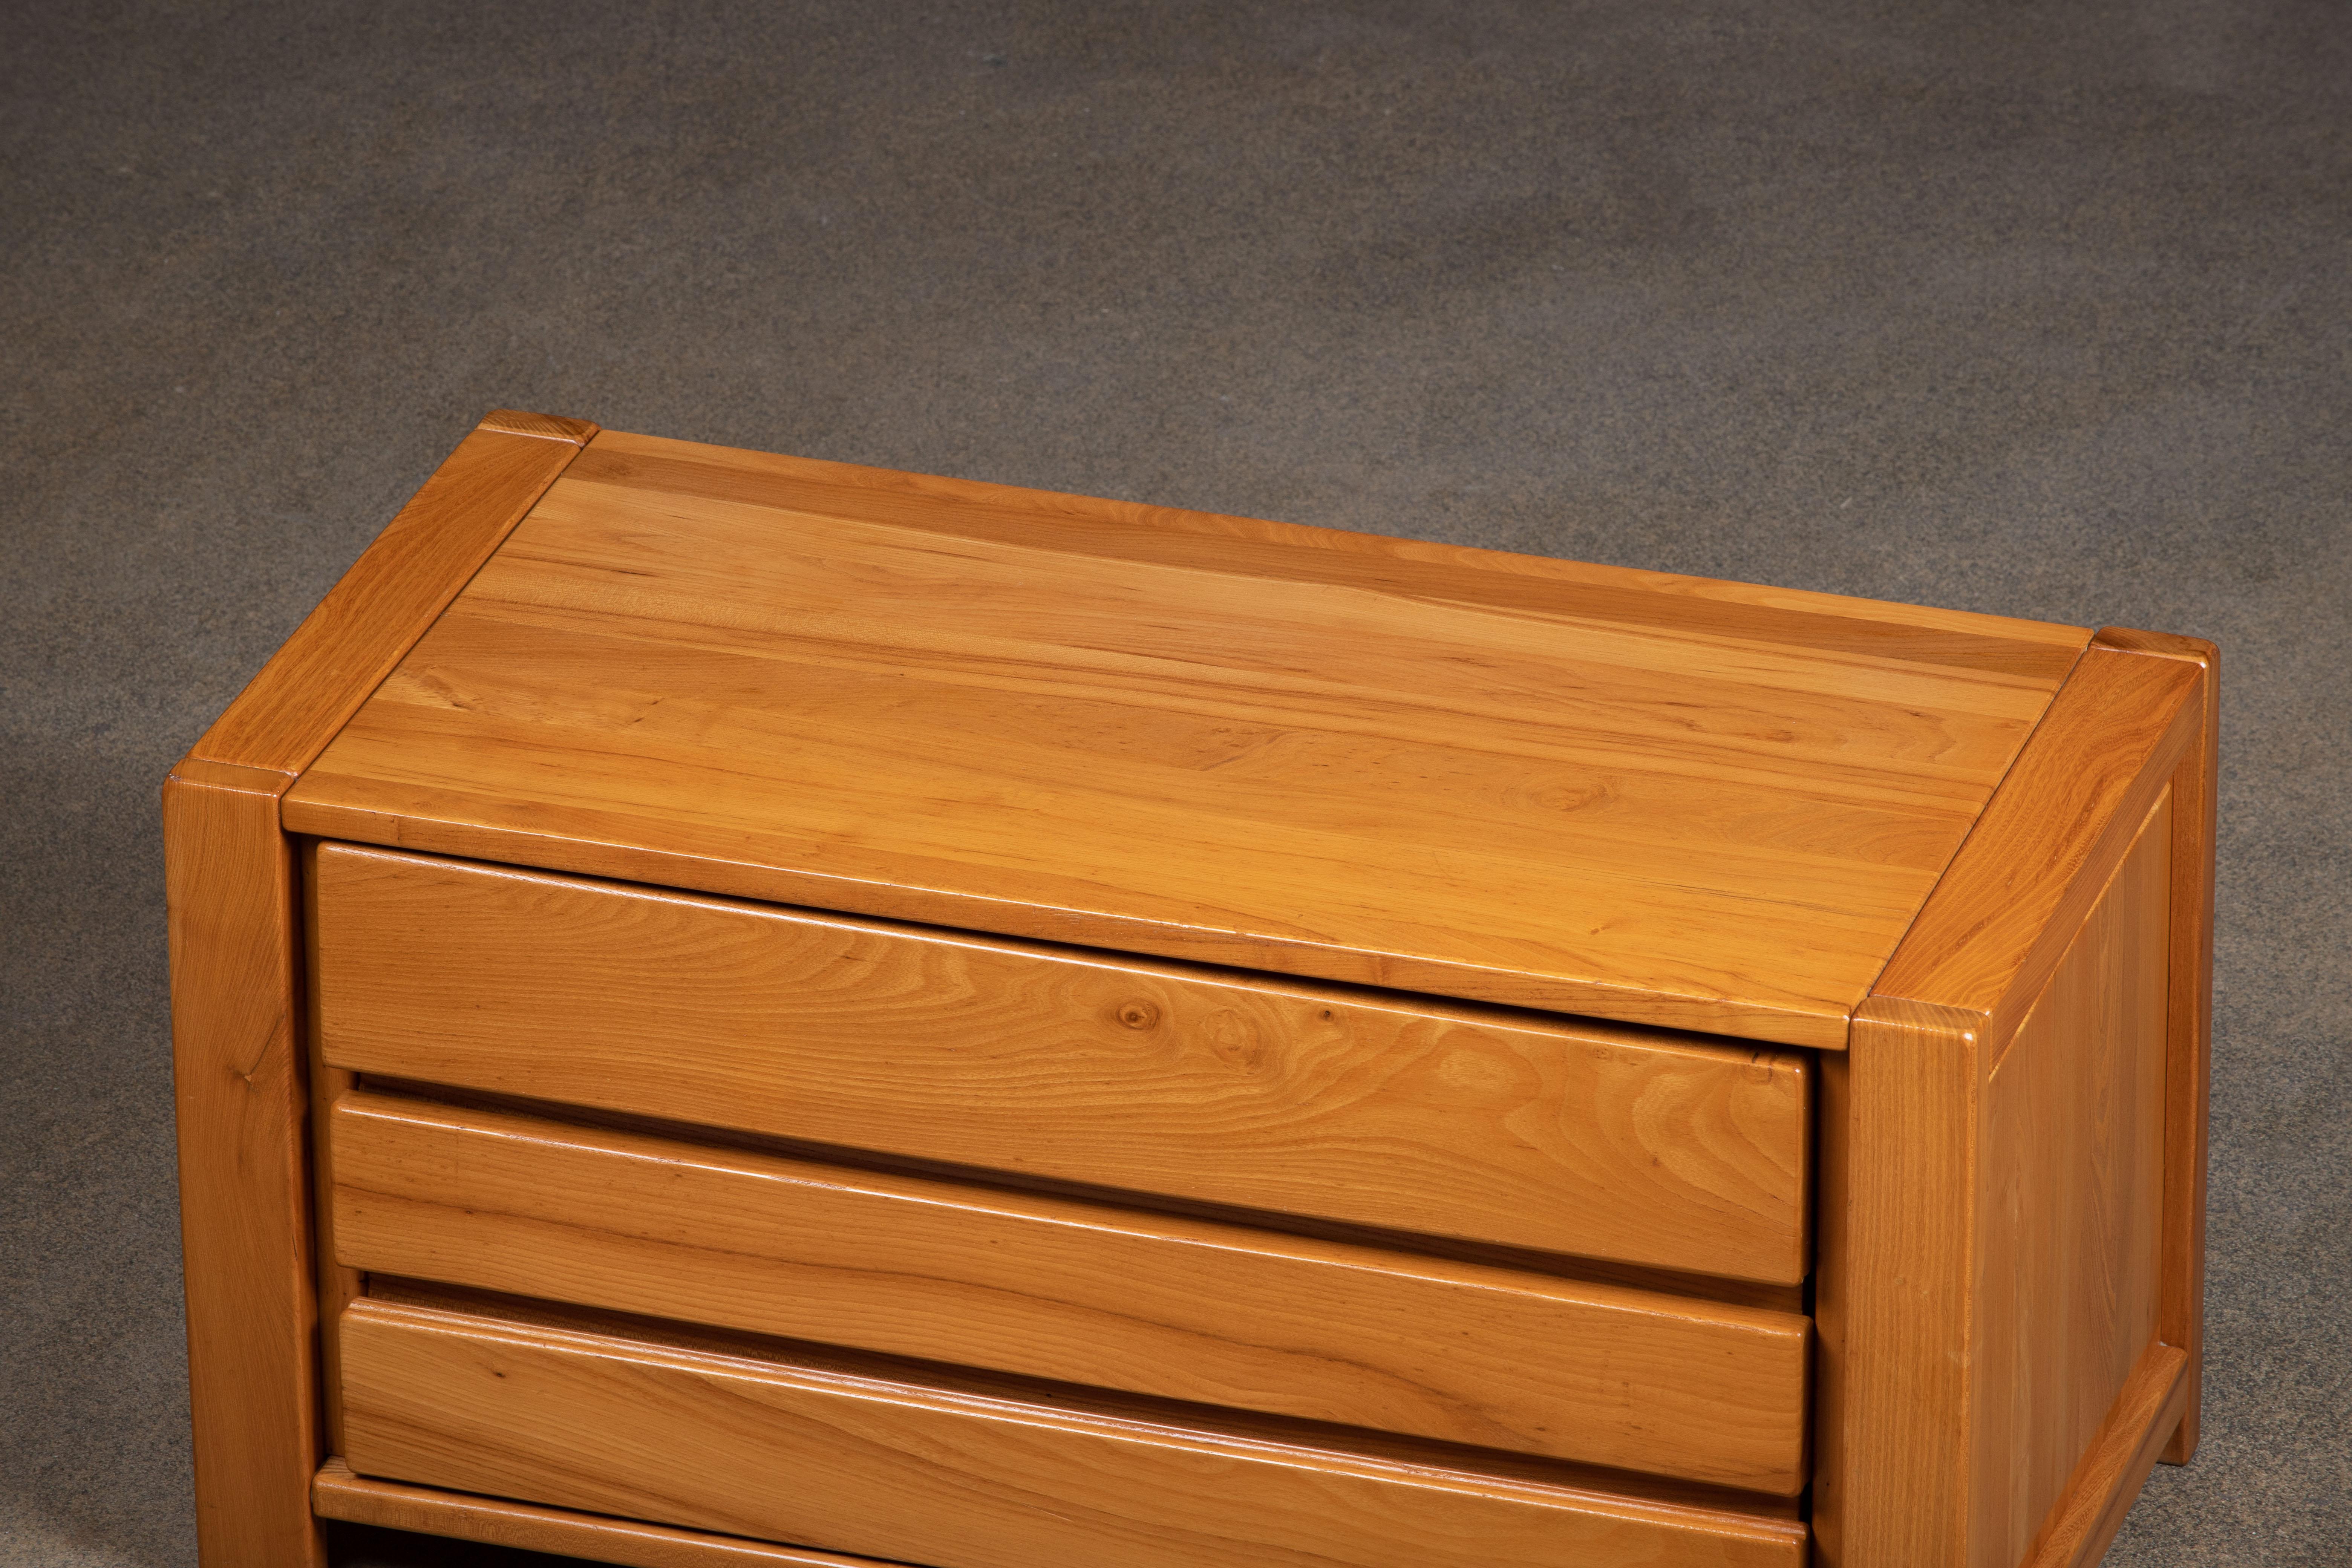 Chapo Insp Sideboard in Solid Elm, France, 1970s For Sale 3